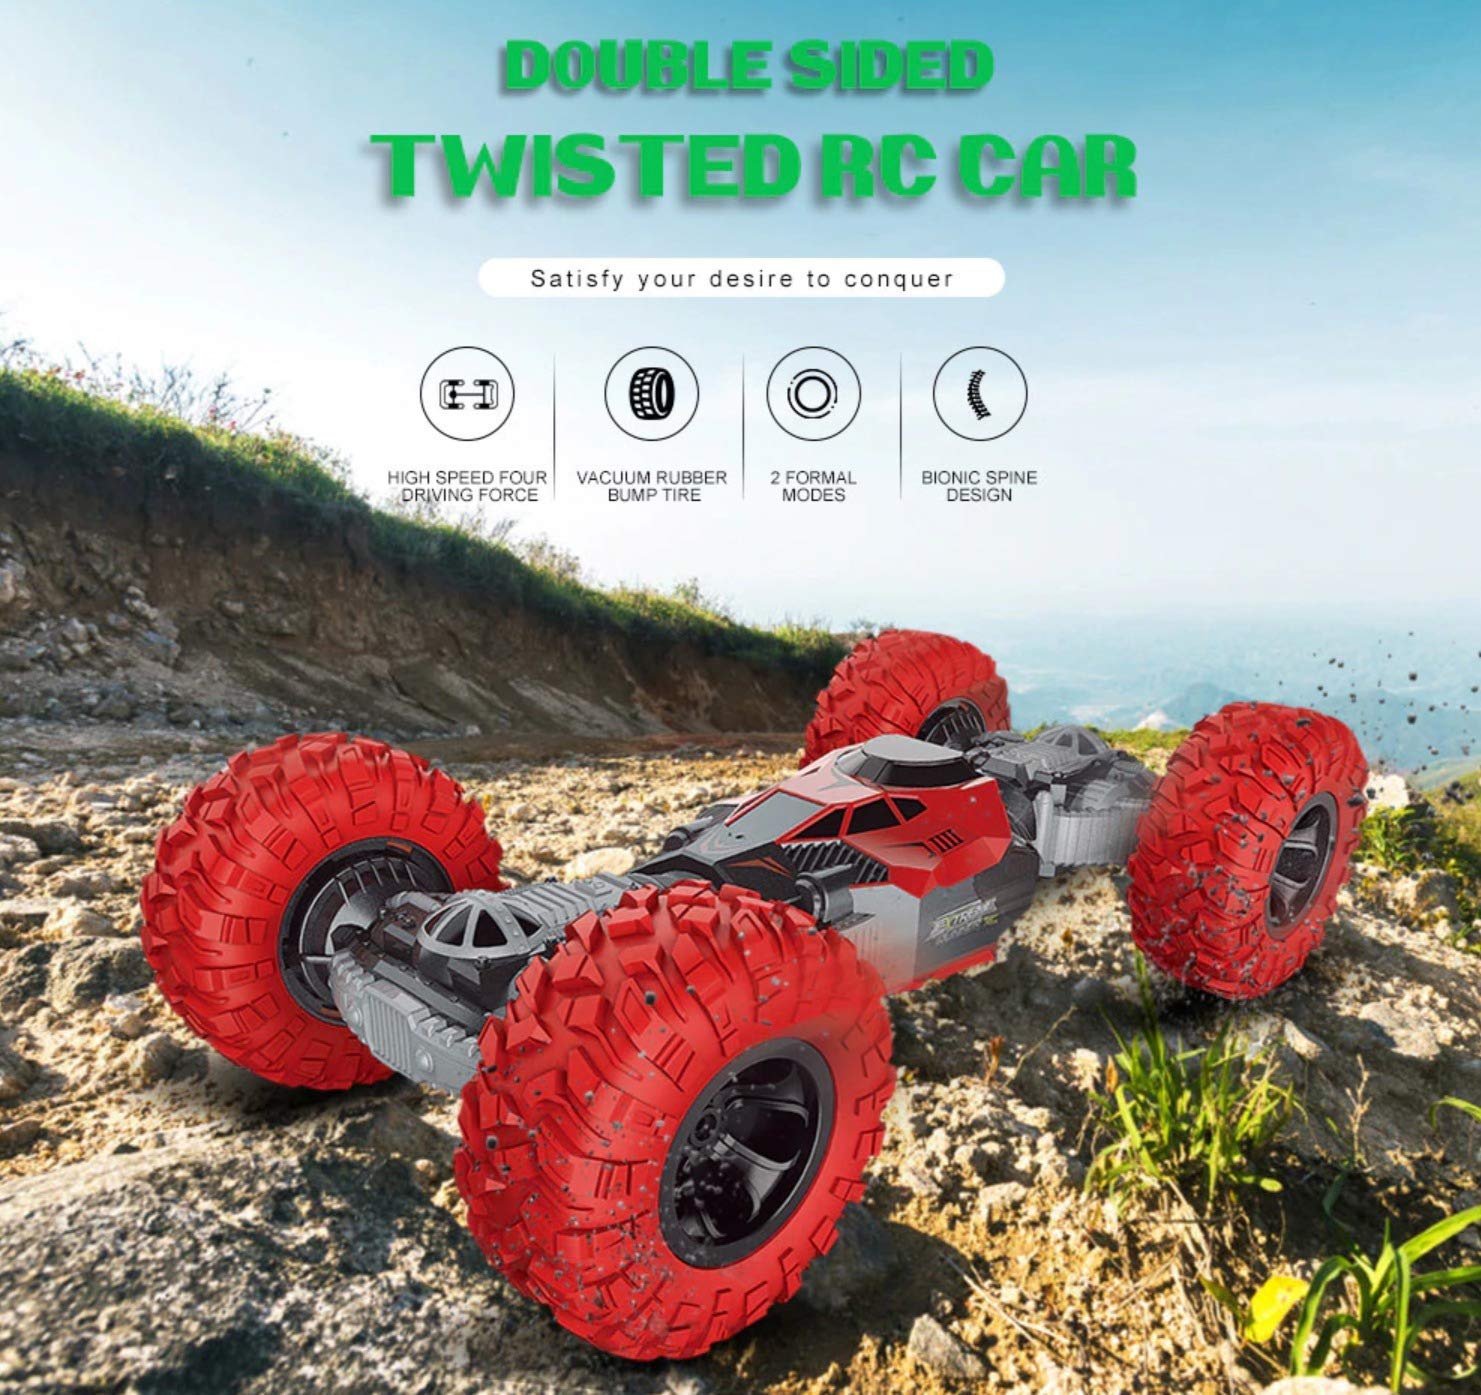 REMOTE CONTROL ORIGINAL MOKA CAR 2 SIDED STUNT BIG TYRES FAST SPEED CHARGEABLE FUNCTION